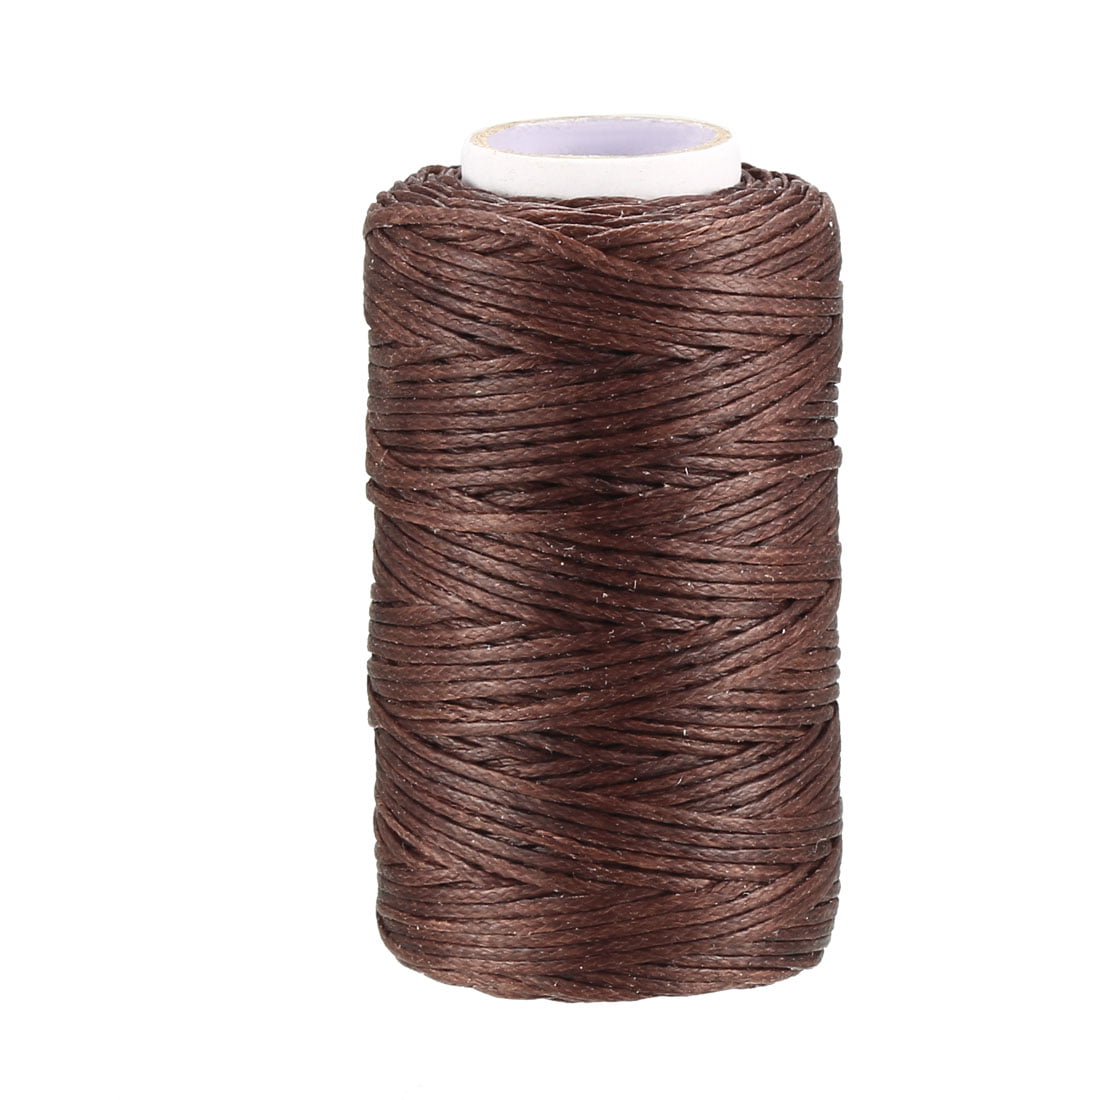 MIUSIE 1pc 50M 150D 1mm Leather Waxed Thread Cord for DIY